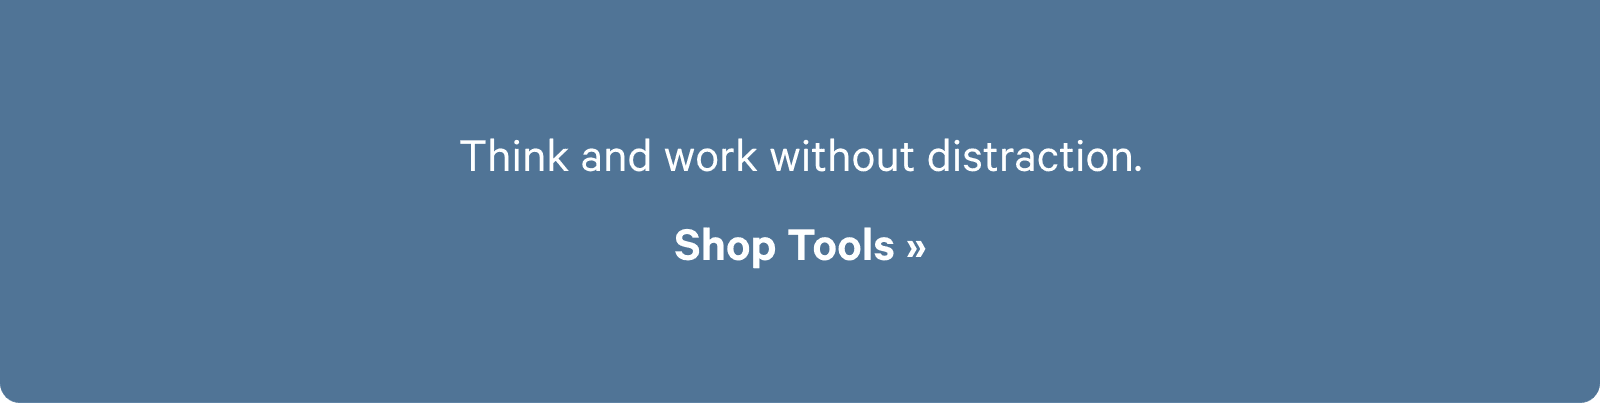 Think and work without distraction. Shop Tools ?